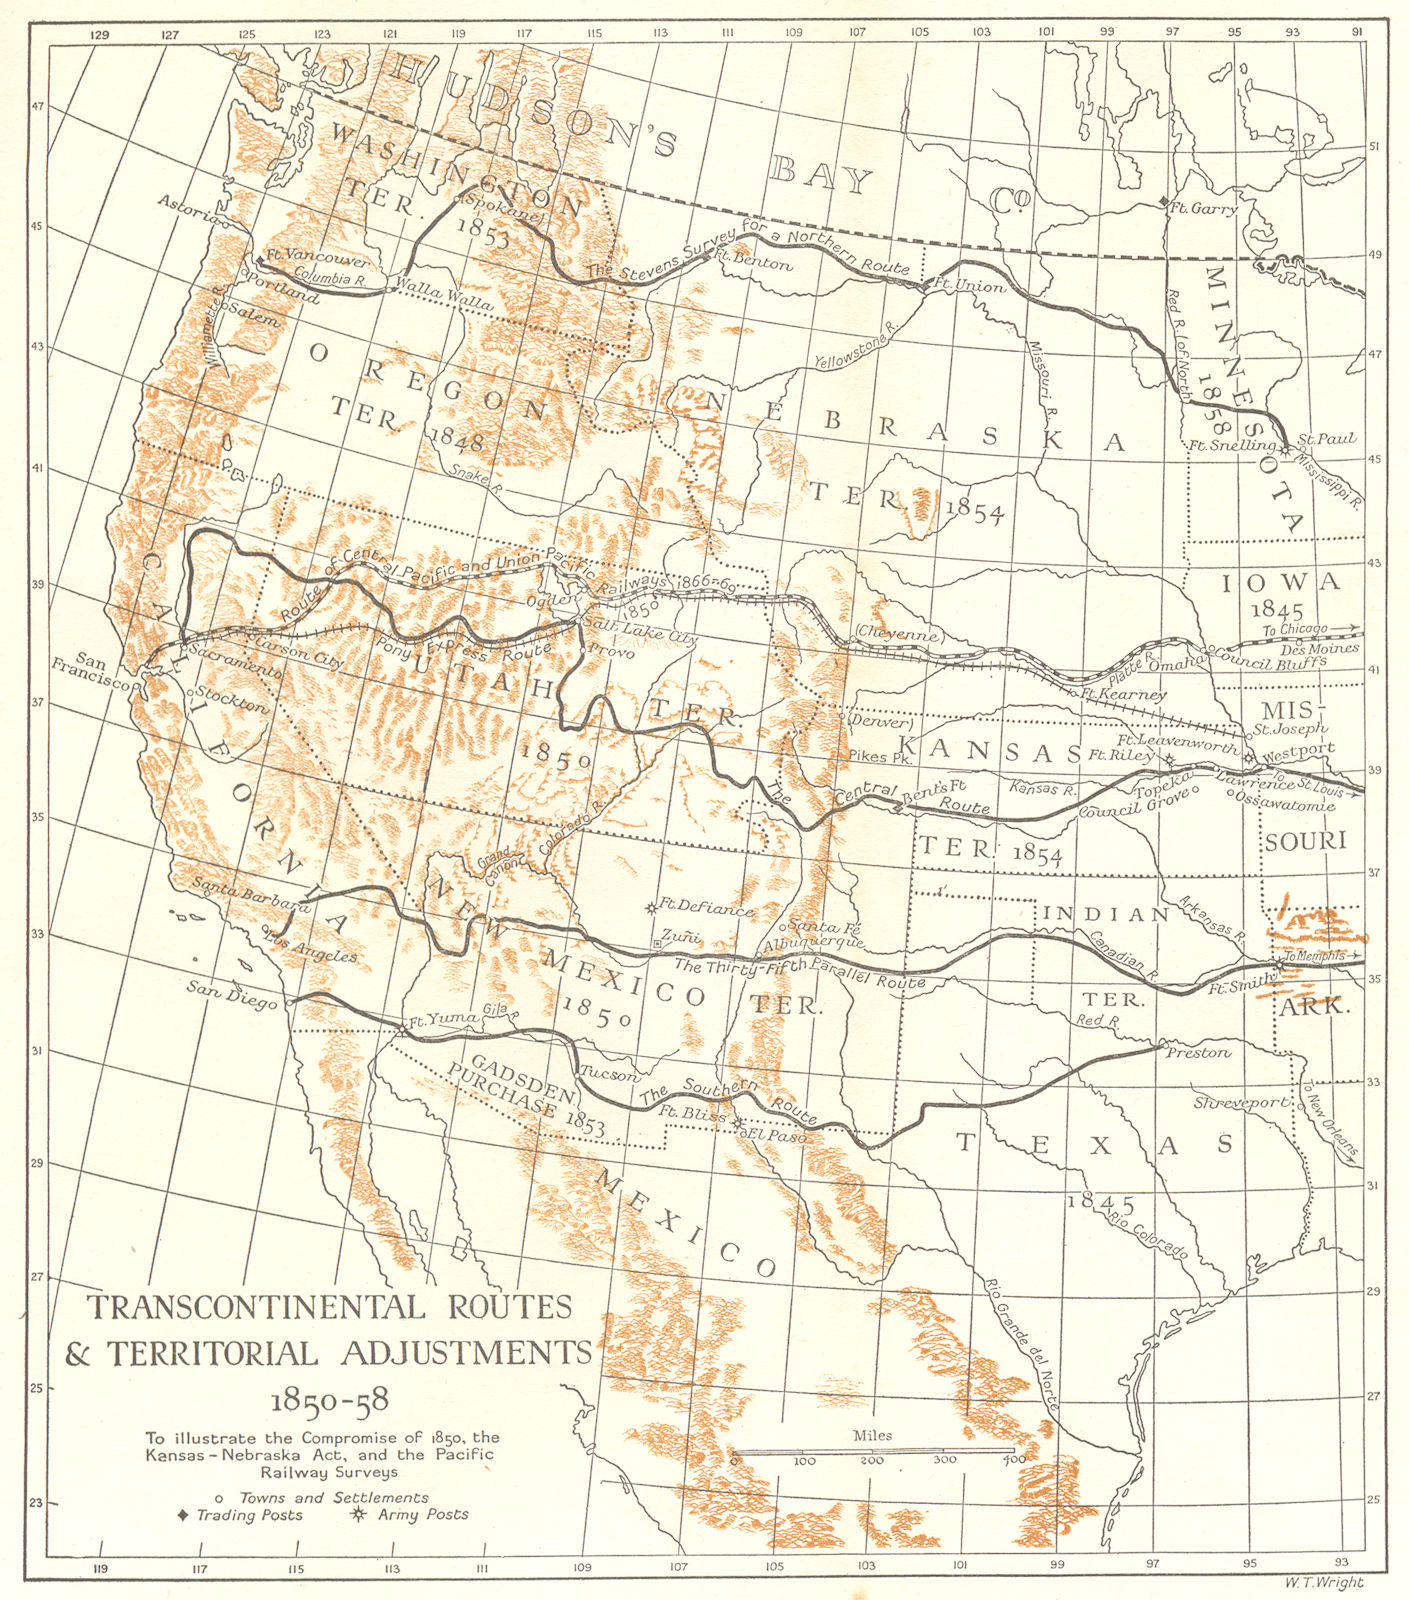 USA. Transcontinental Routes & Territorial Adjustments, 1850-58 1942 old map